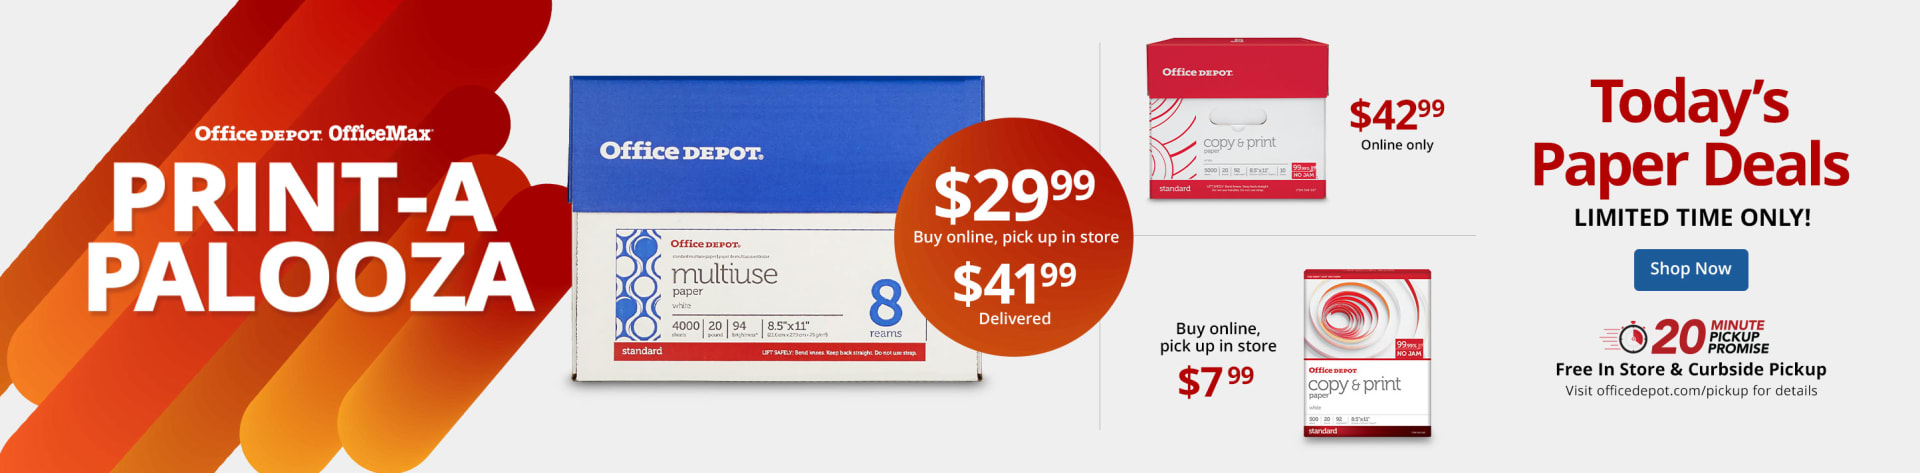 Today's Paper Deals! Limited Time Only!